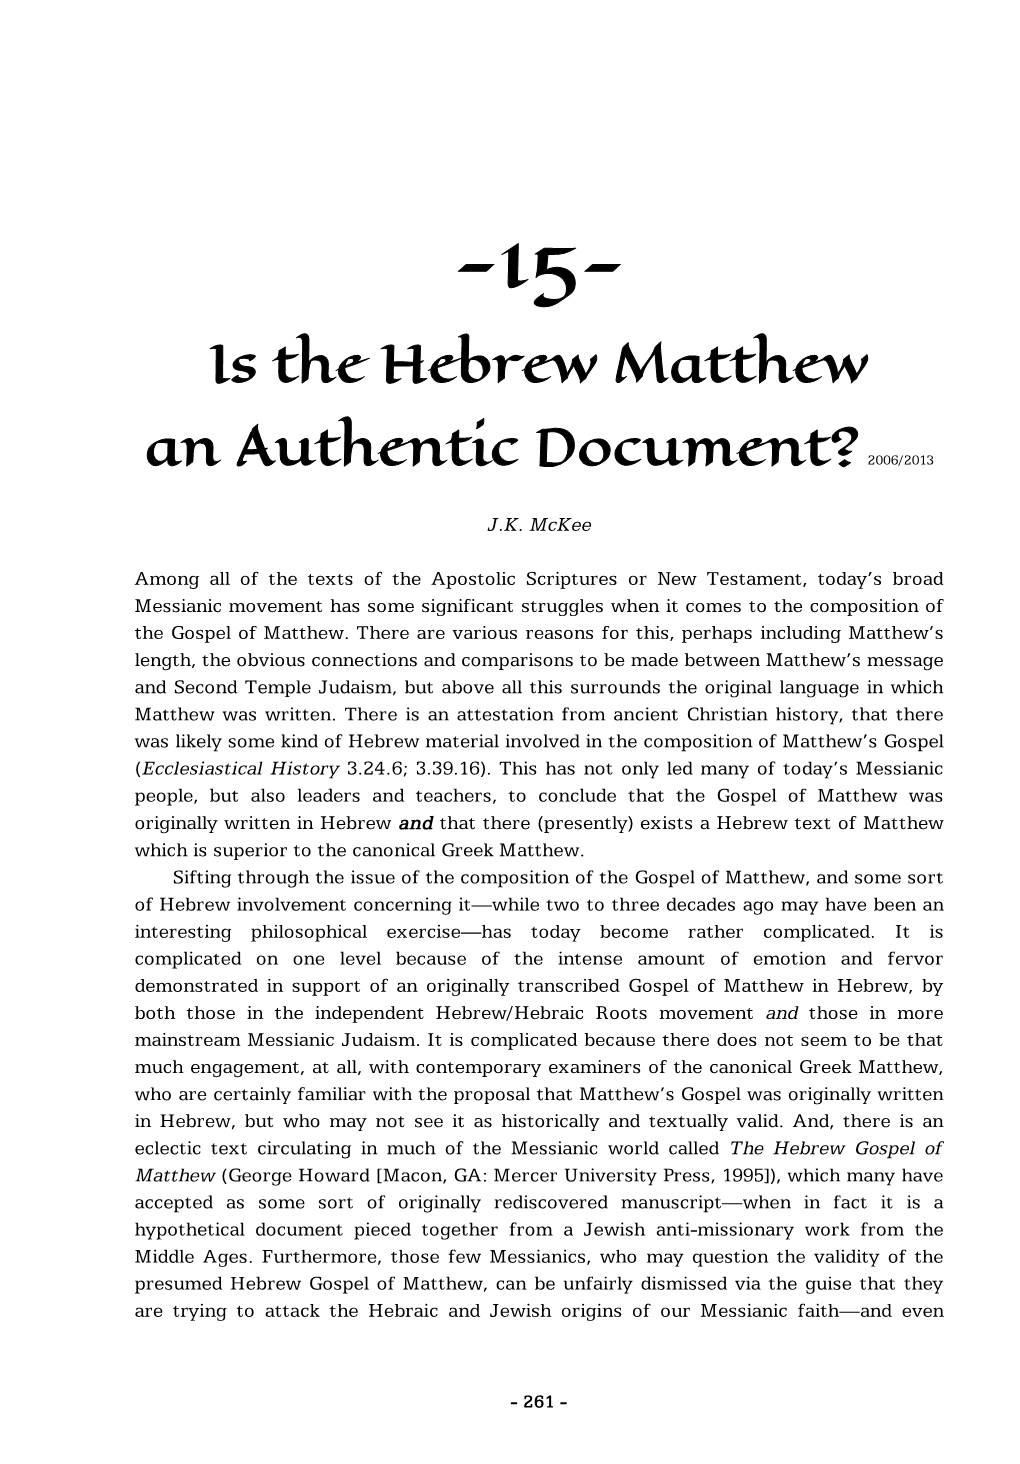 Is the Hebrew Matthew an Authentic Document?2006/2013